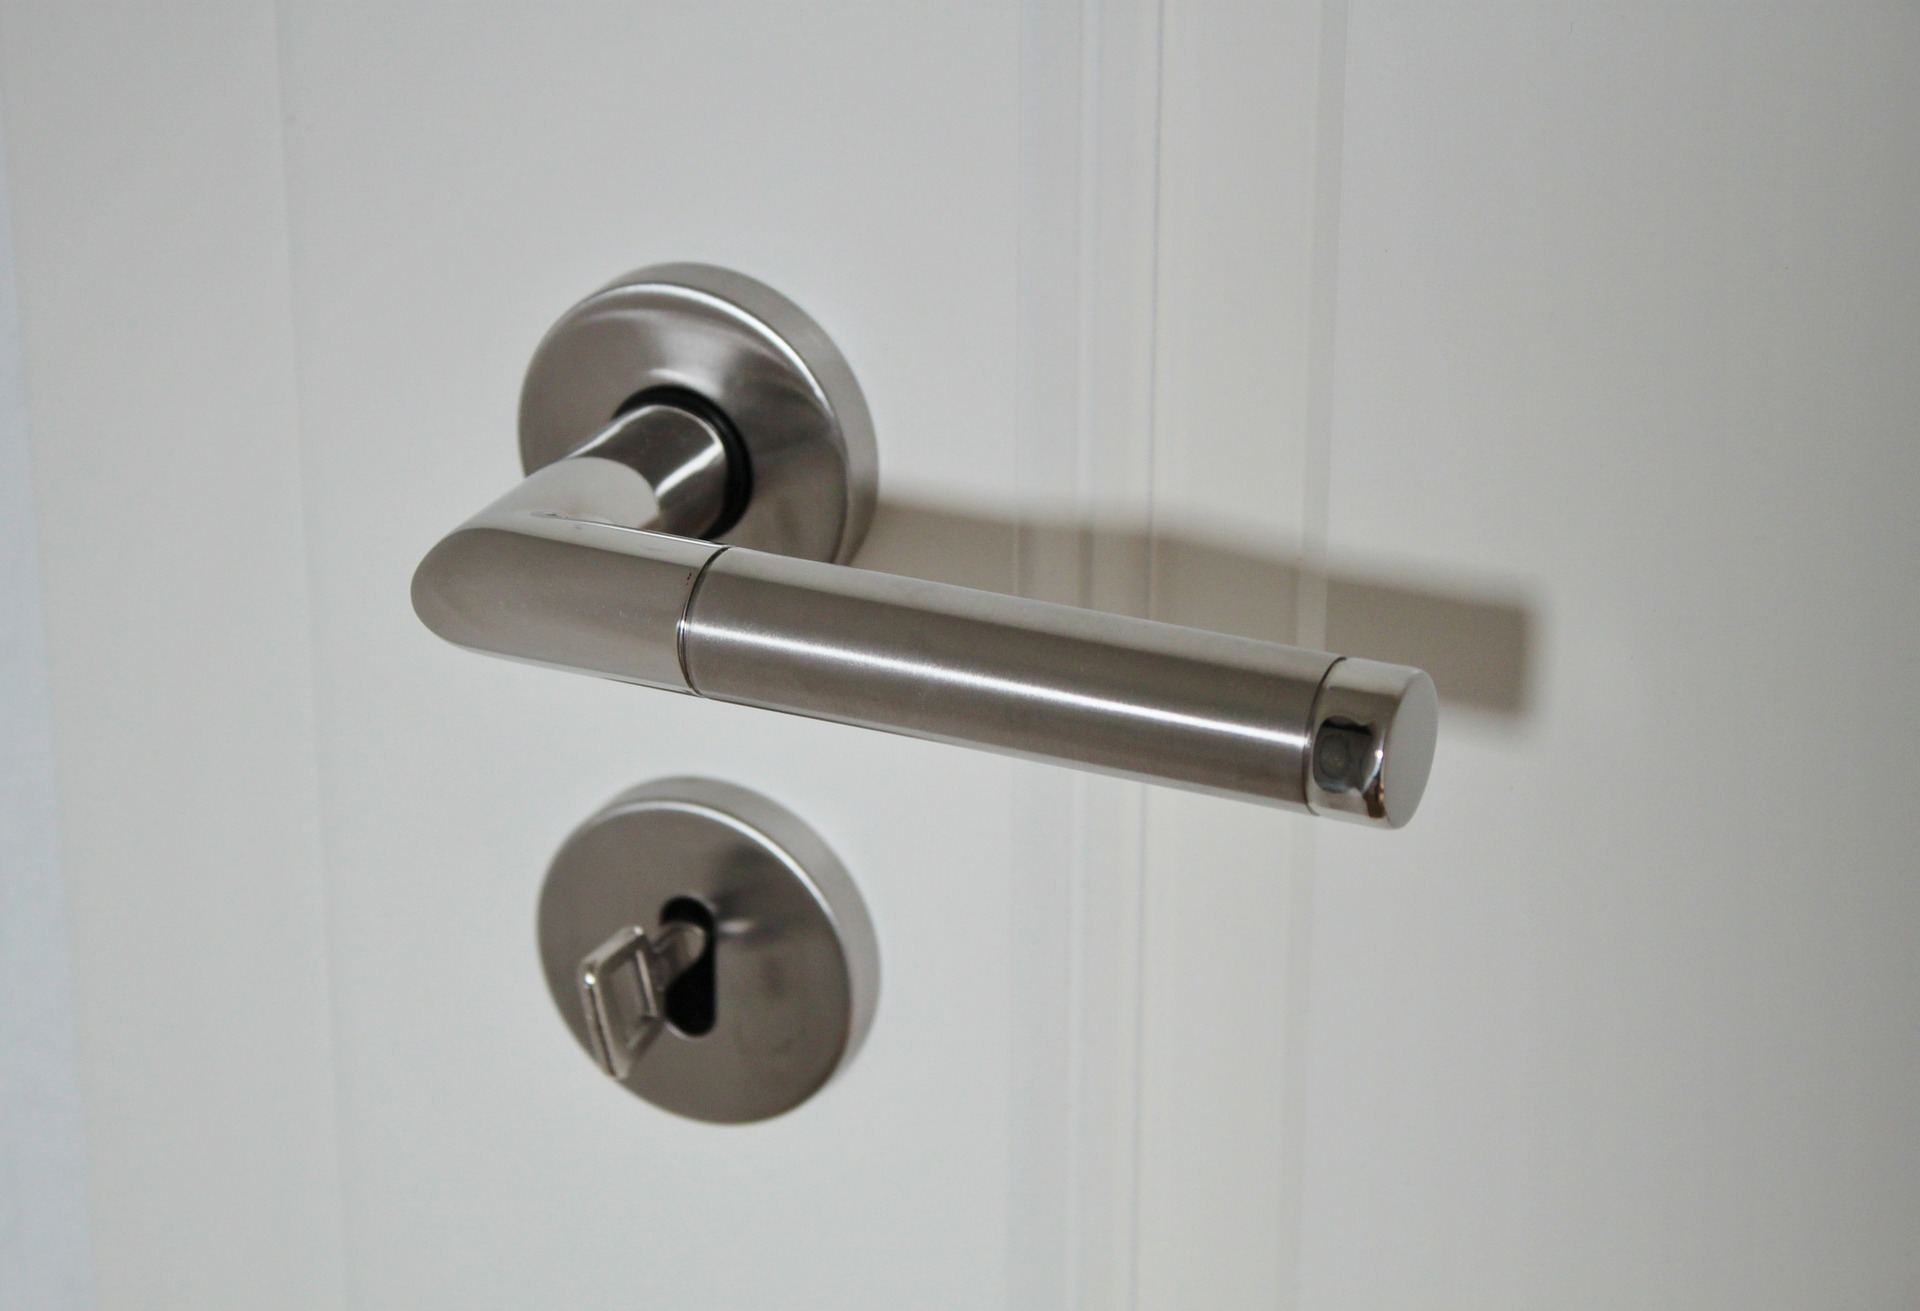 Commercial locksmith services is reasonably priced Seagoville